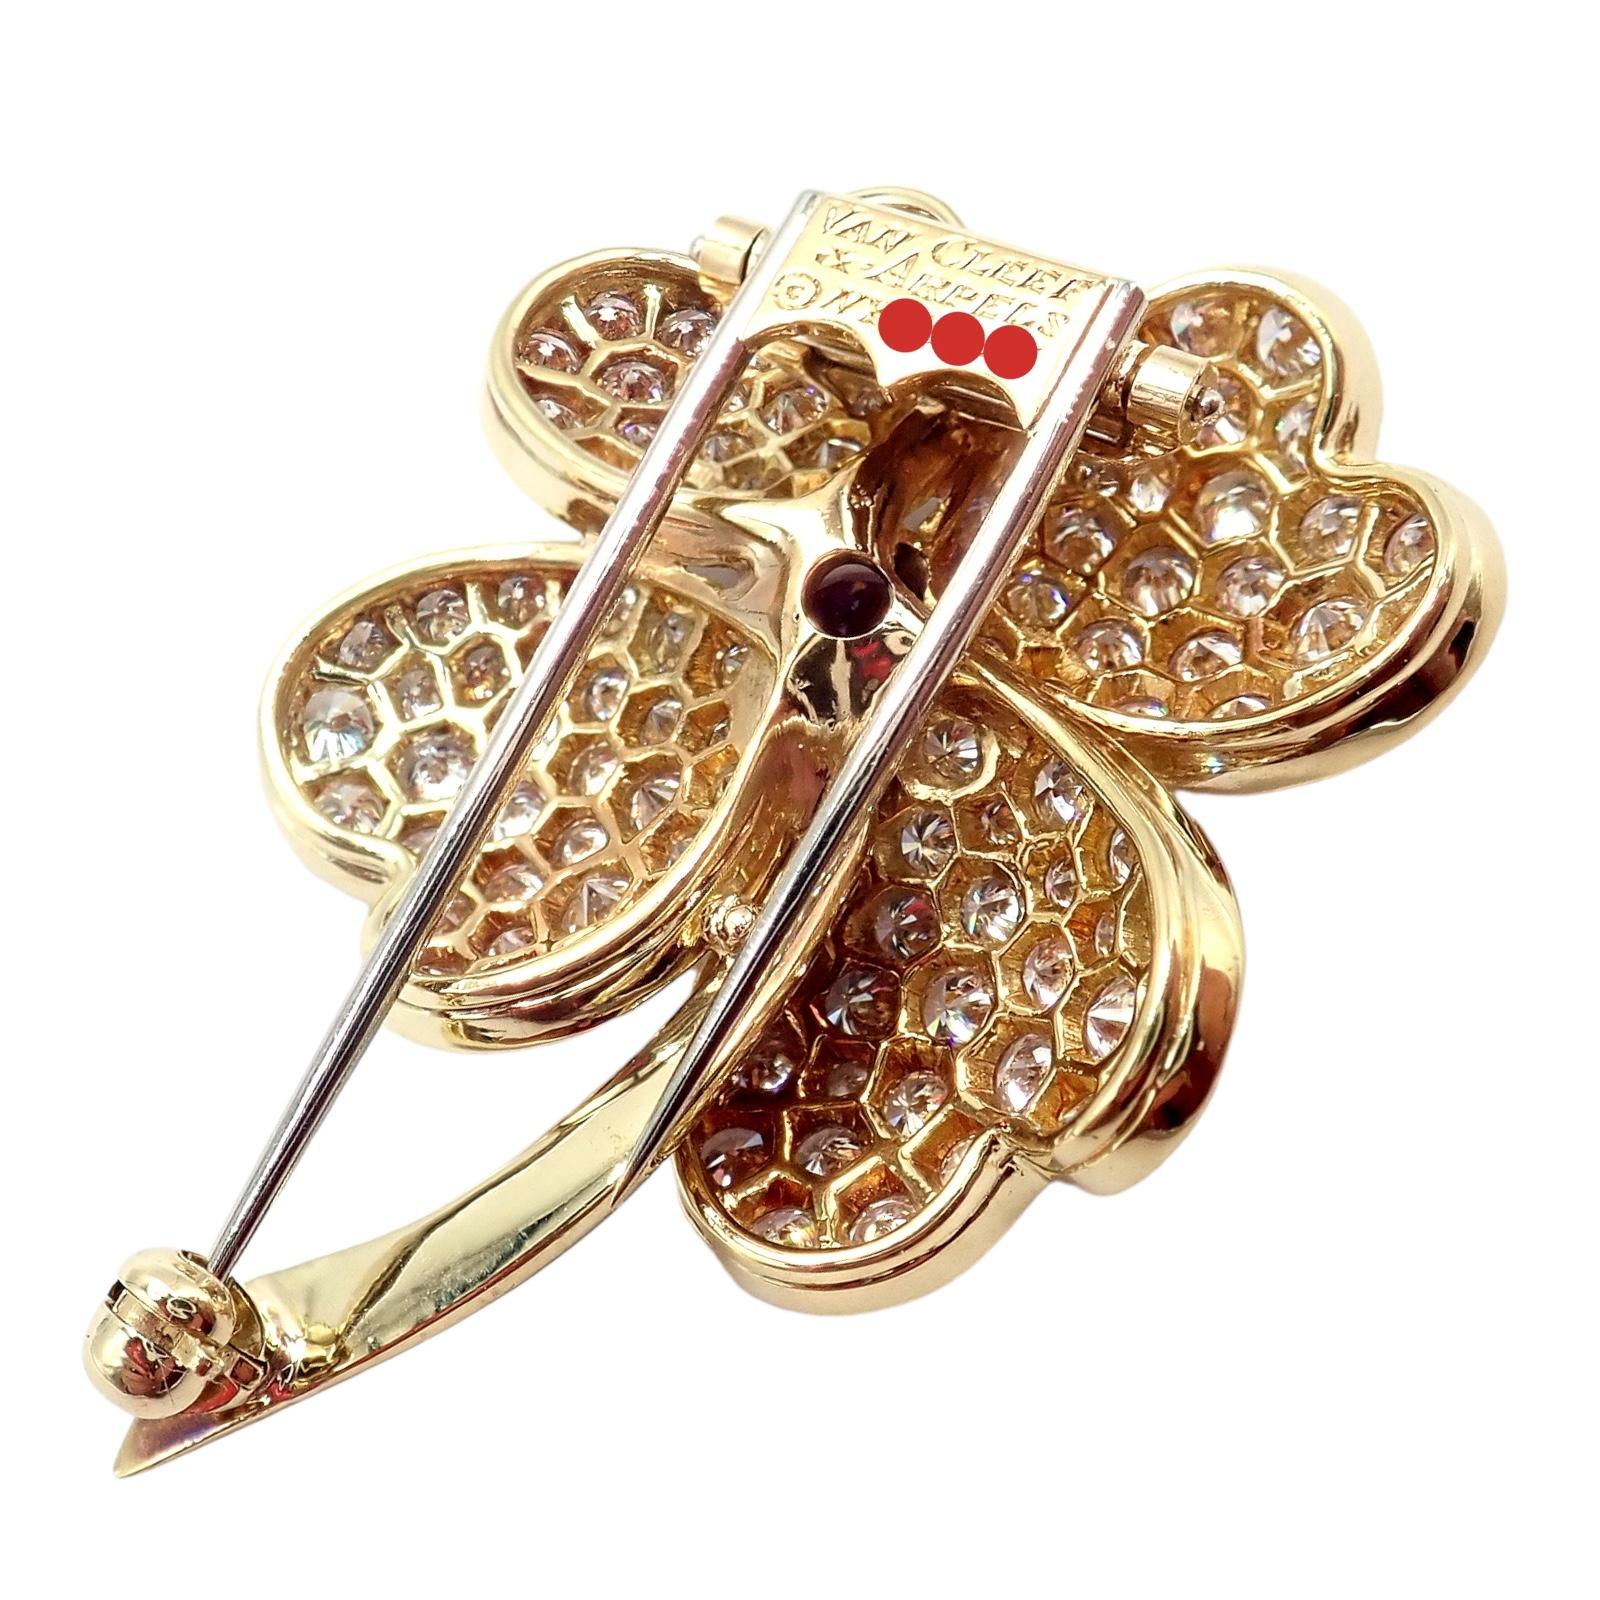 Brilliant Cut Van Cleef & Arpels Cosmos Diamond And Ruby Yellow Gold Pendant Brooch For Sale